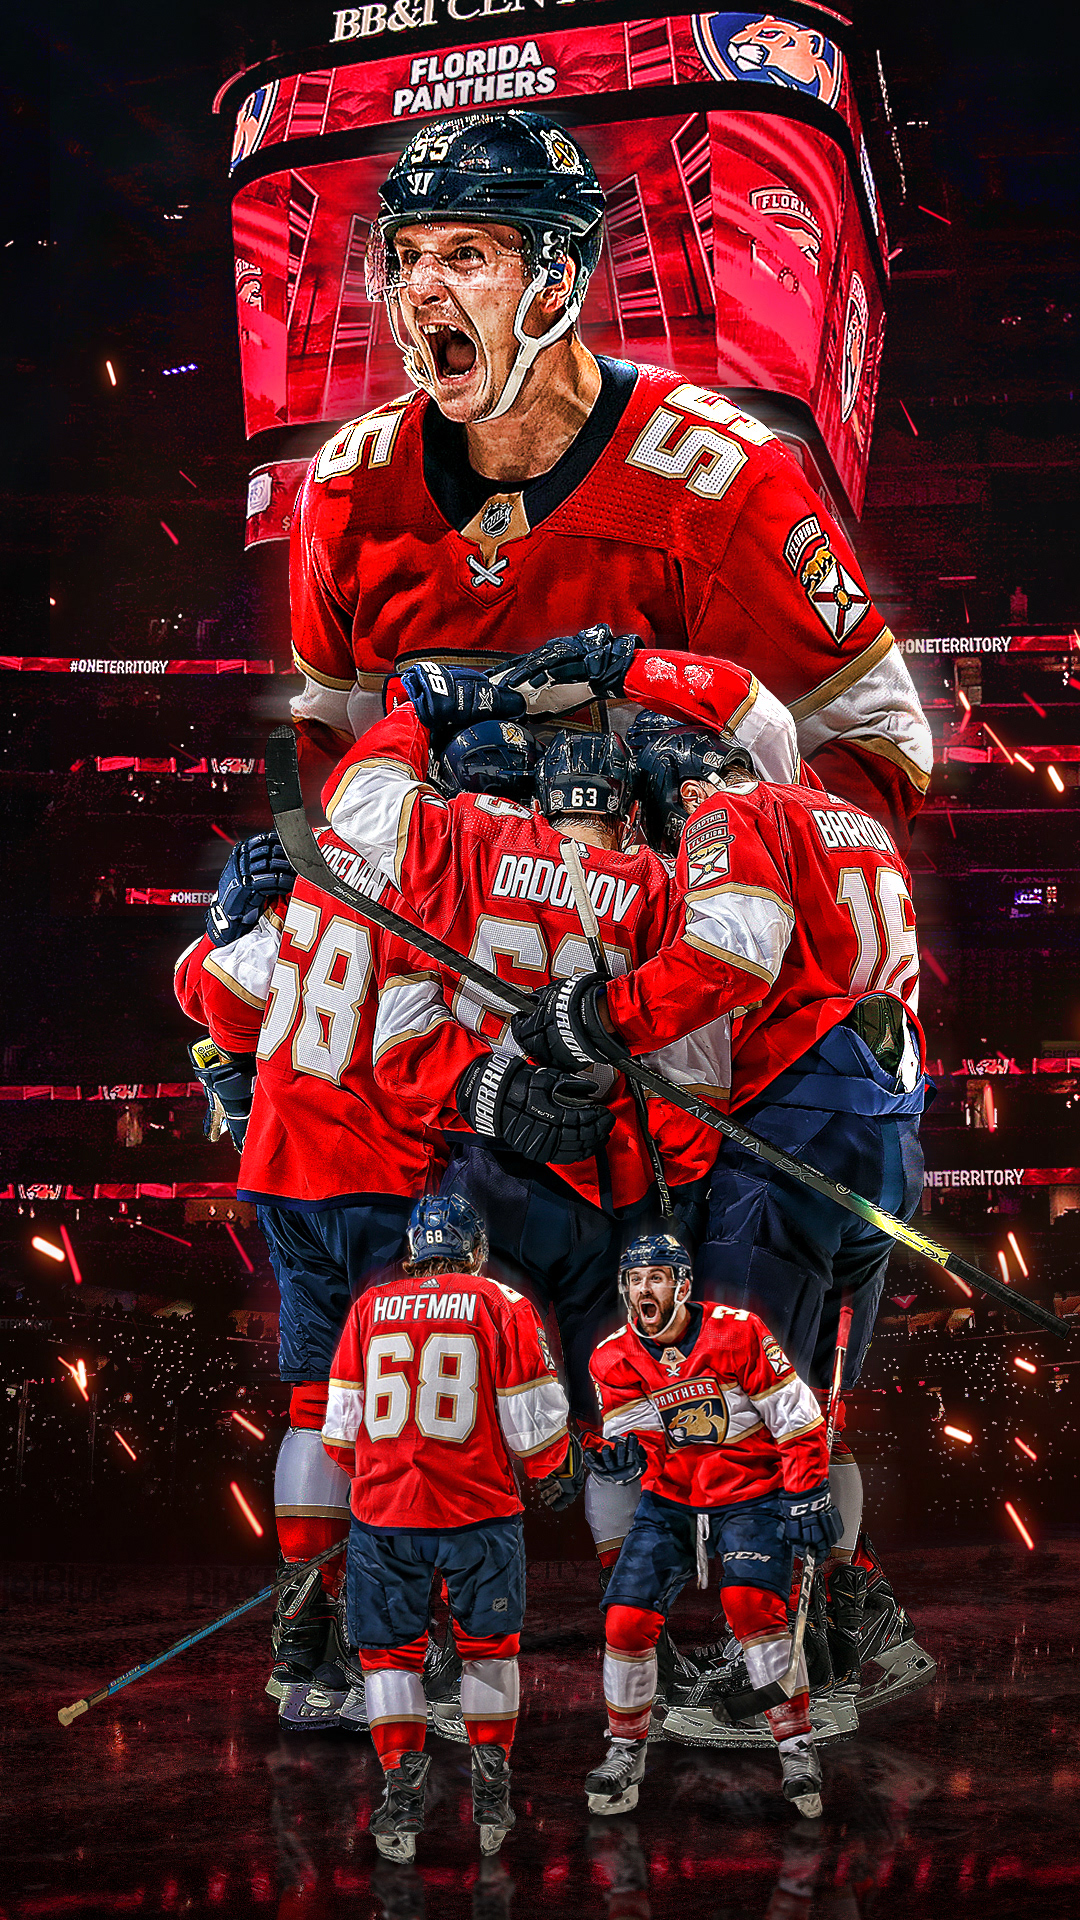 NHL - 2021 Florida Panthers Wallpapers on Behance